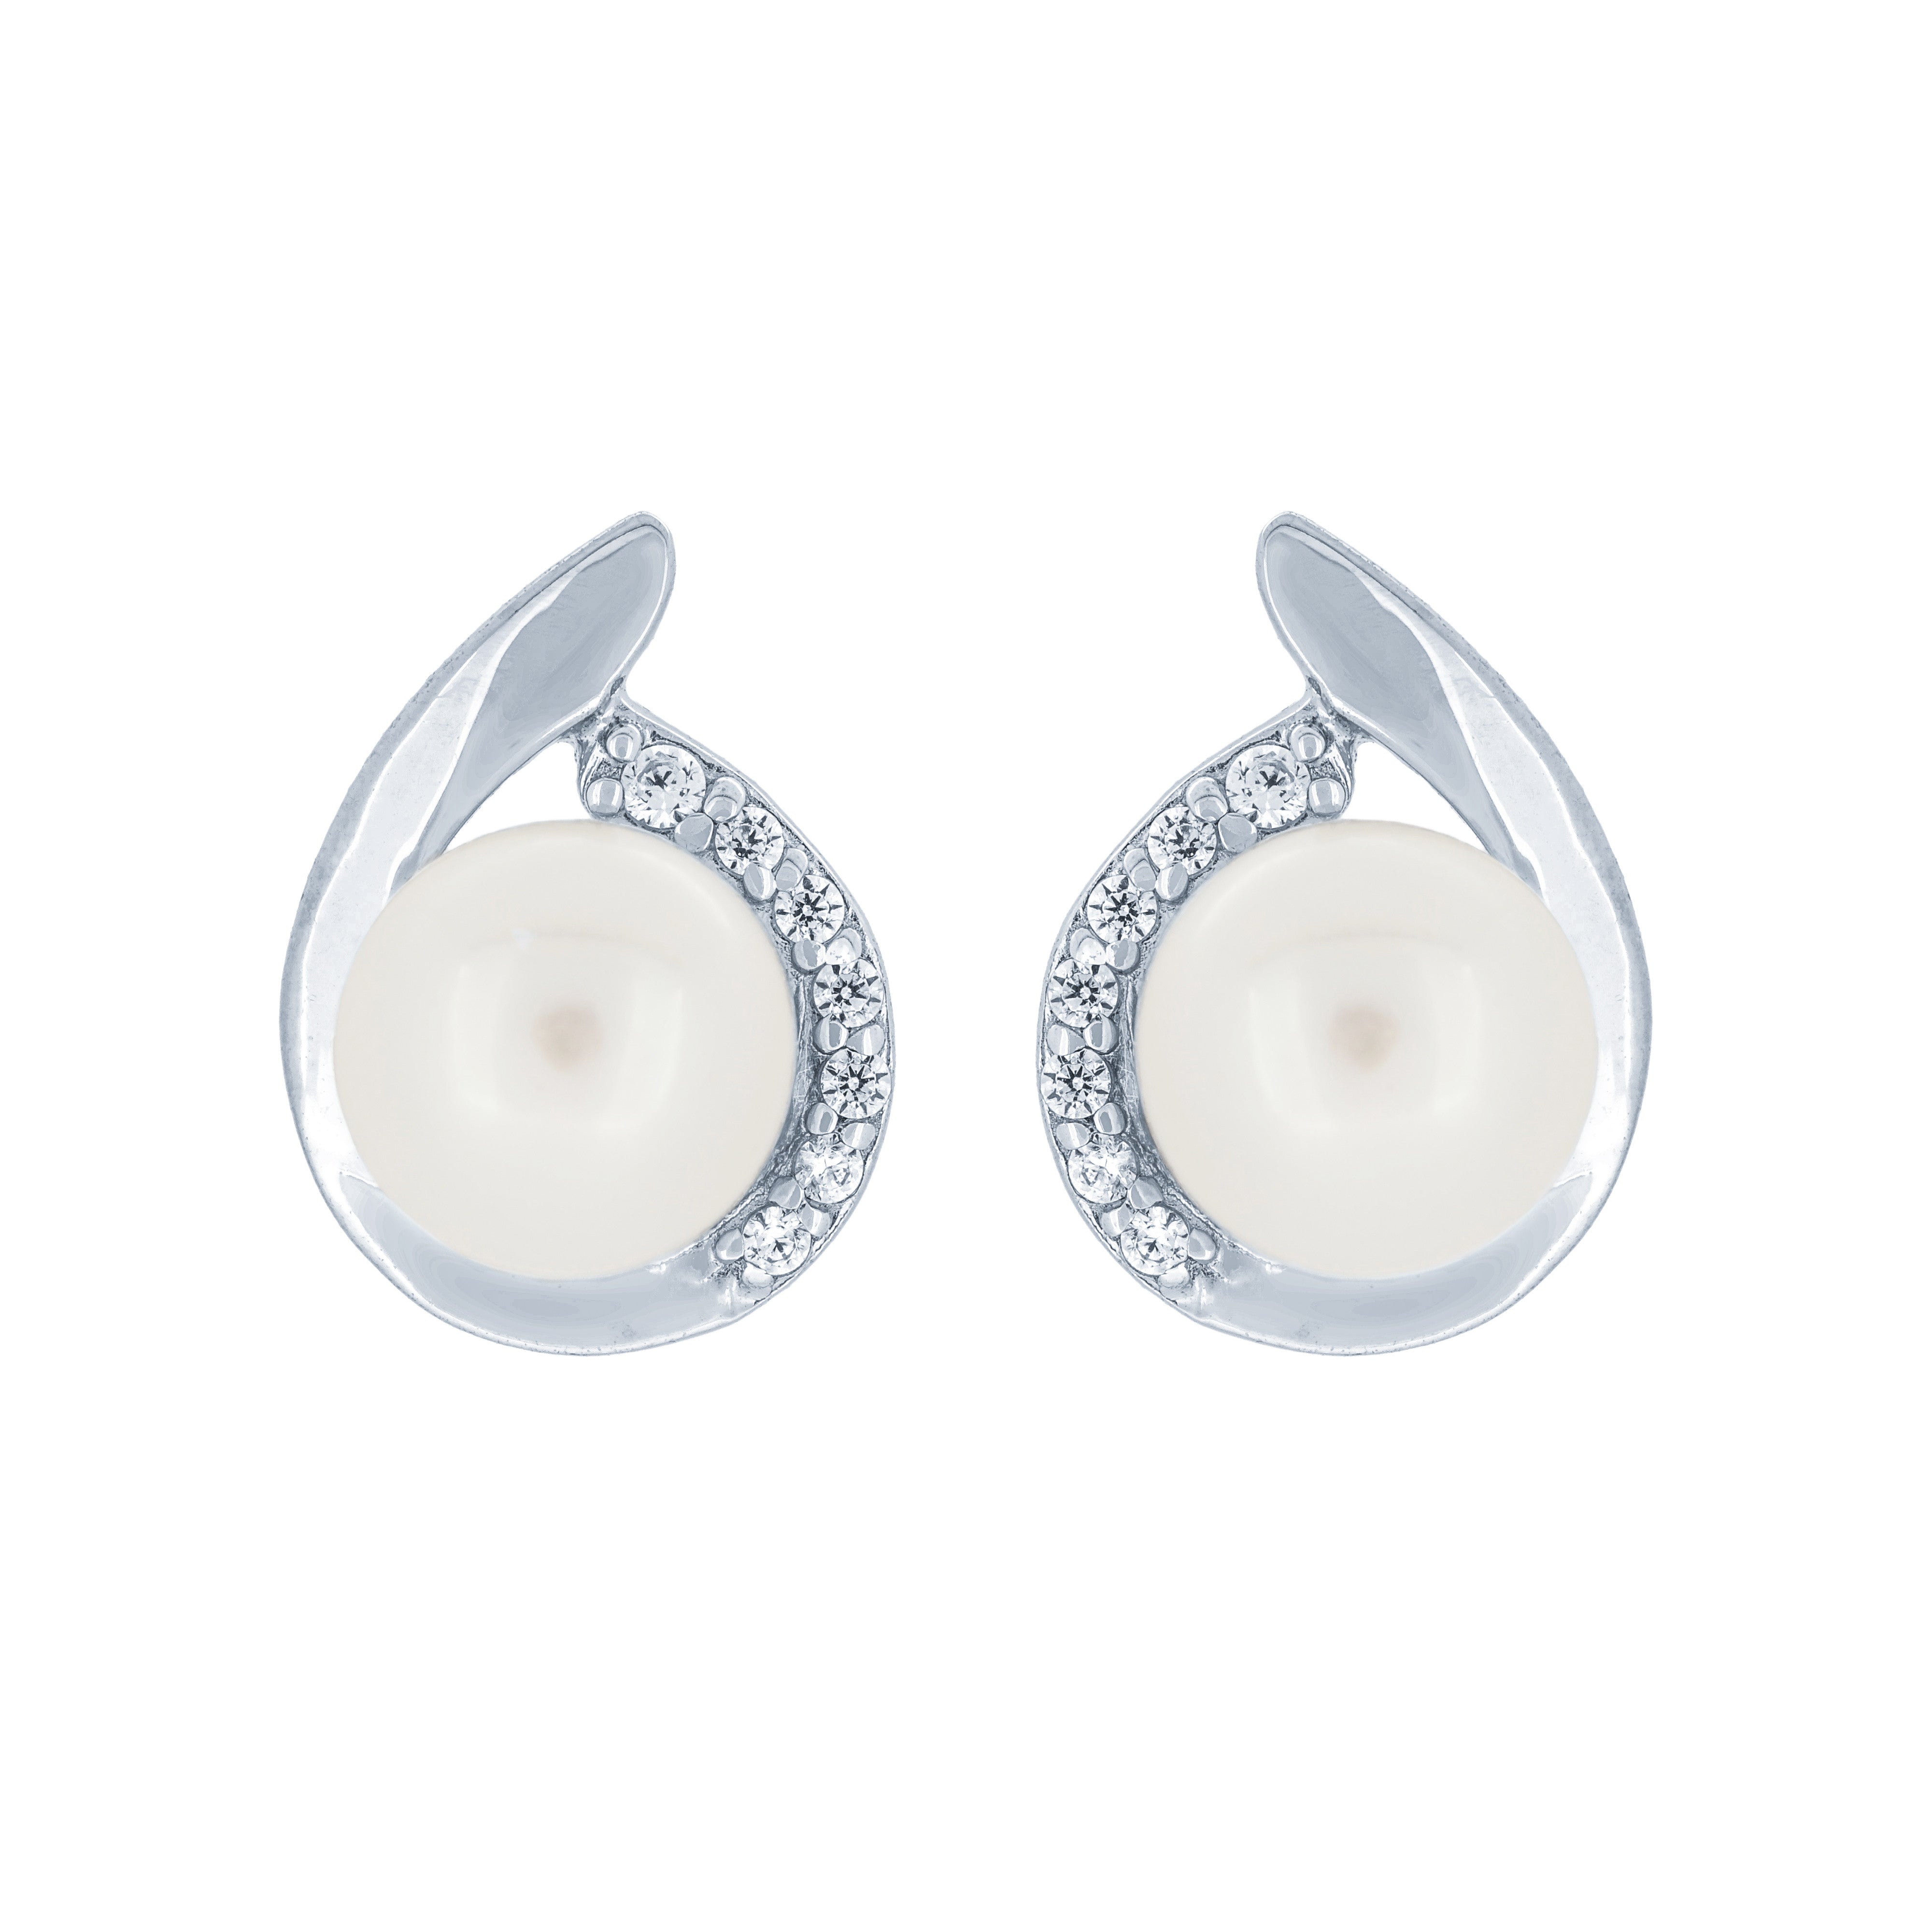 (100020) 6-6.5mm Freshwater Cultured Pearl White Cubic Zirconia Stud Earrings In Sterling Silver